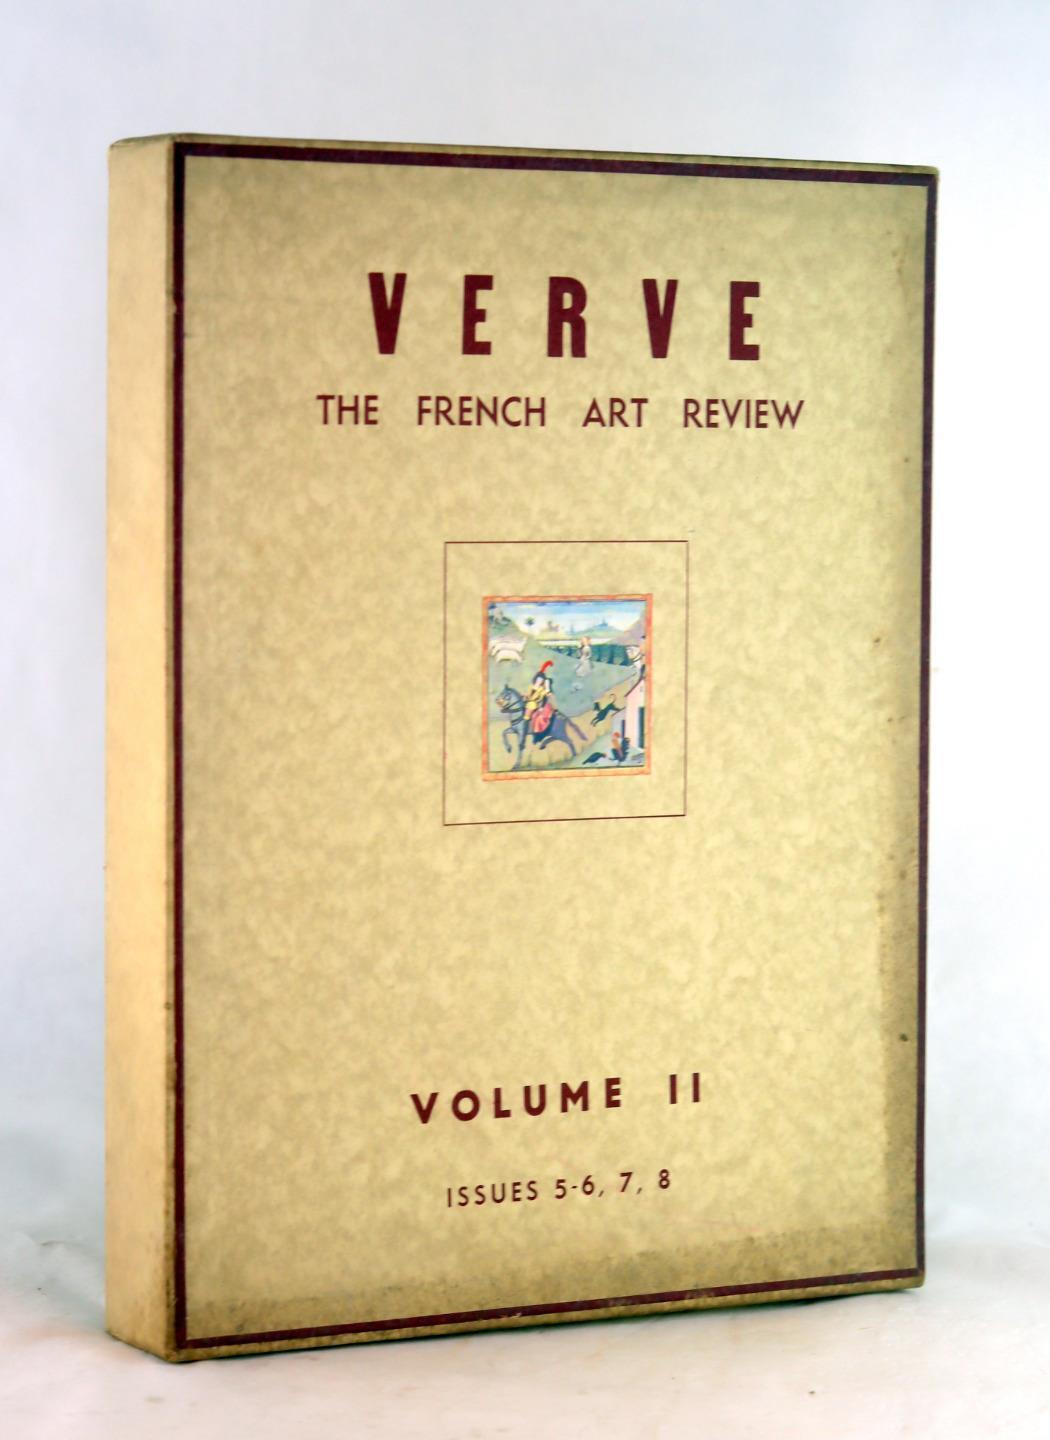 1939-40 Verve An Artistic and Literary Quarterly Vol 2 Issues 5-6 7 8 PB w/Box